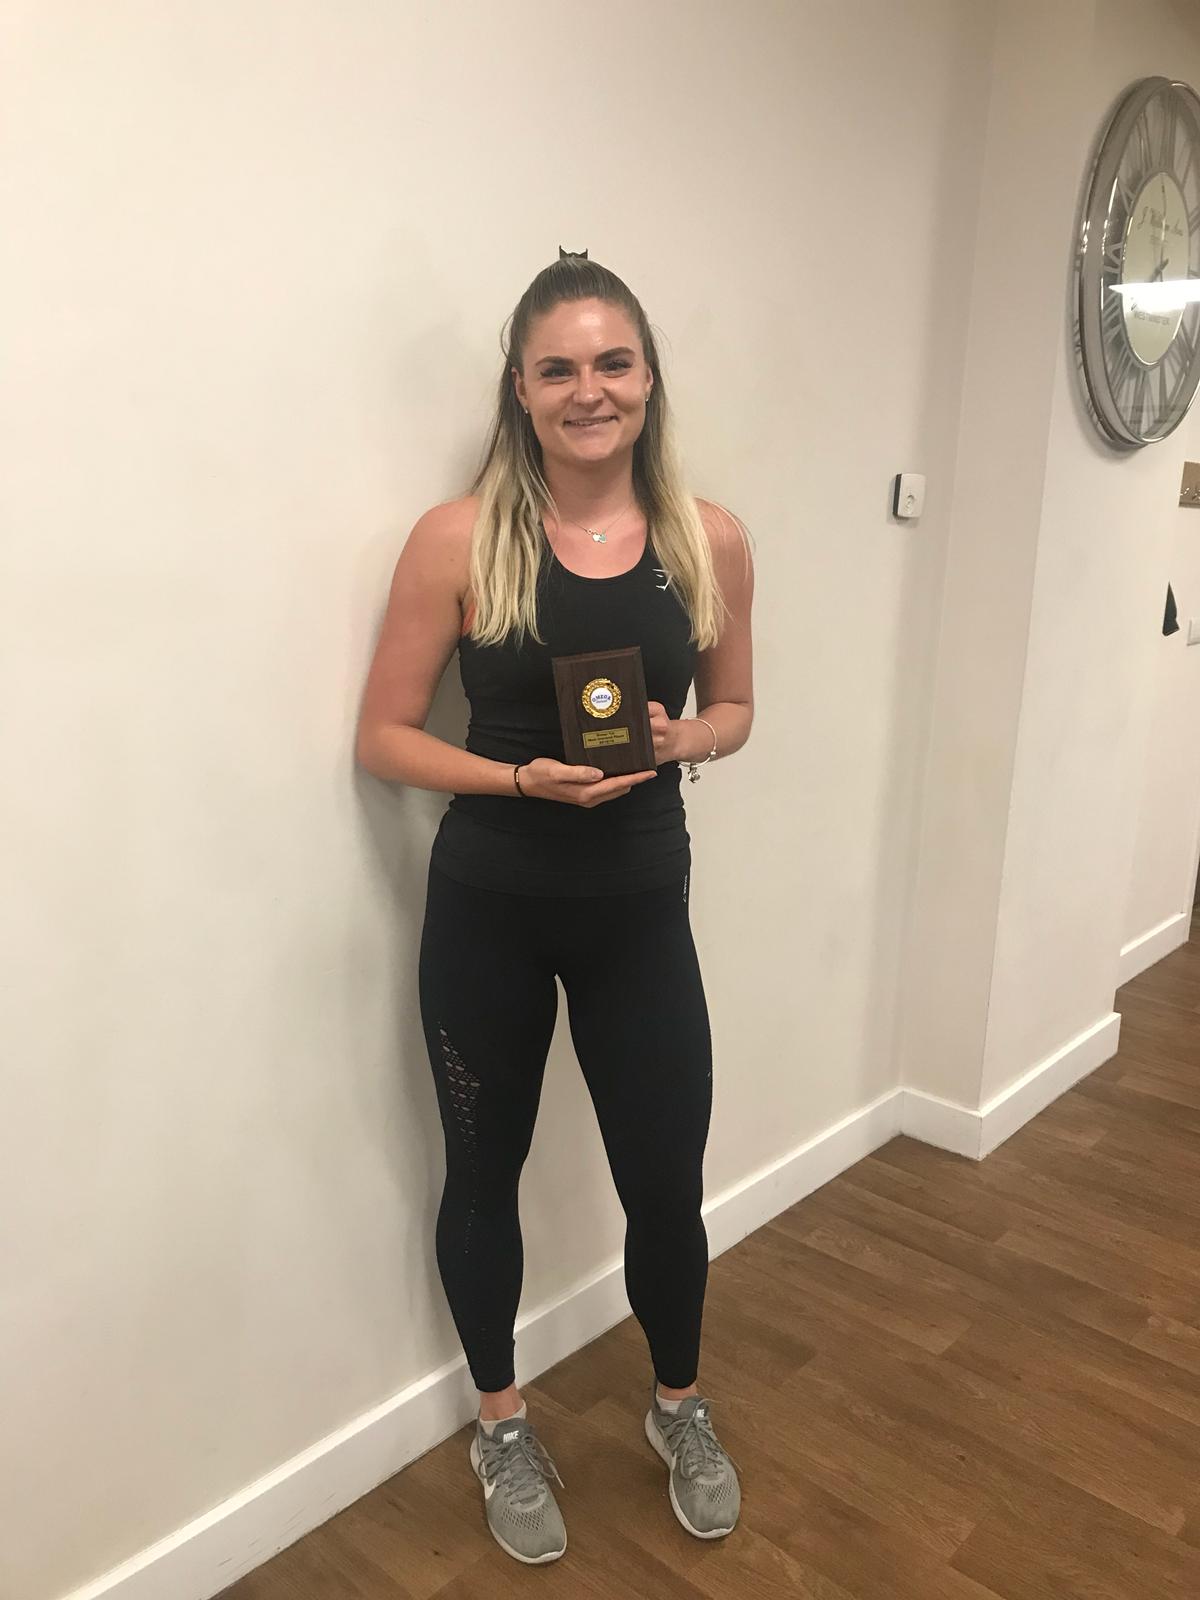 Most Improved Player A Team - Phoebe Gillen